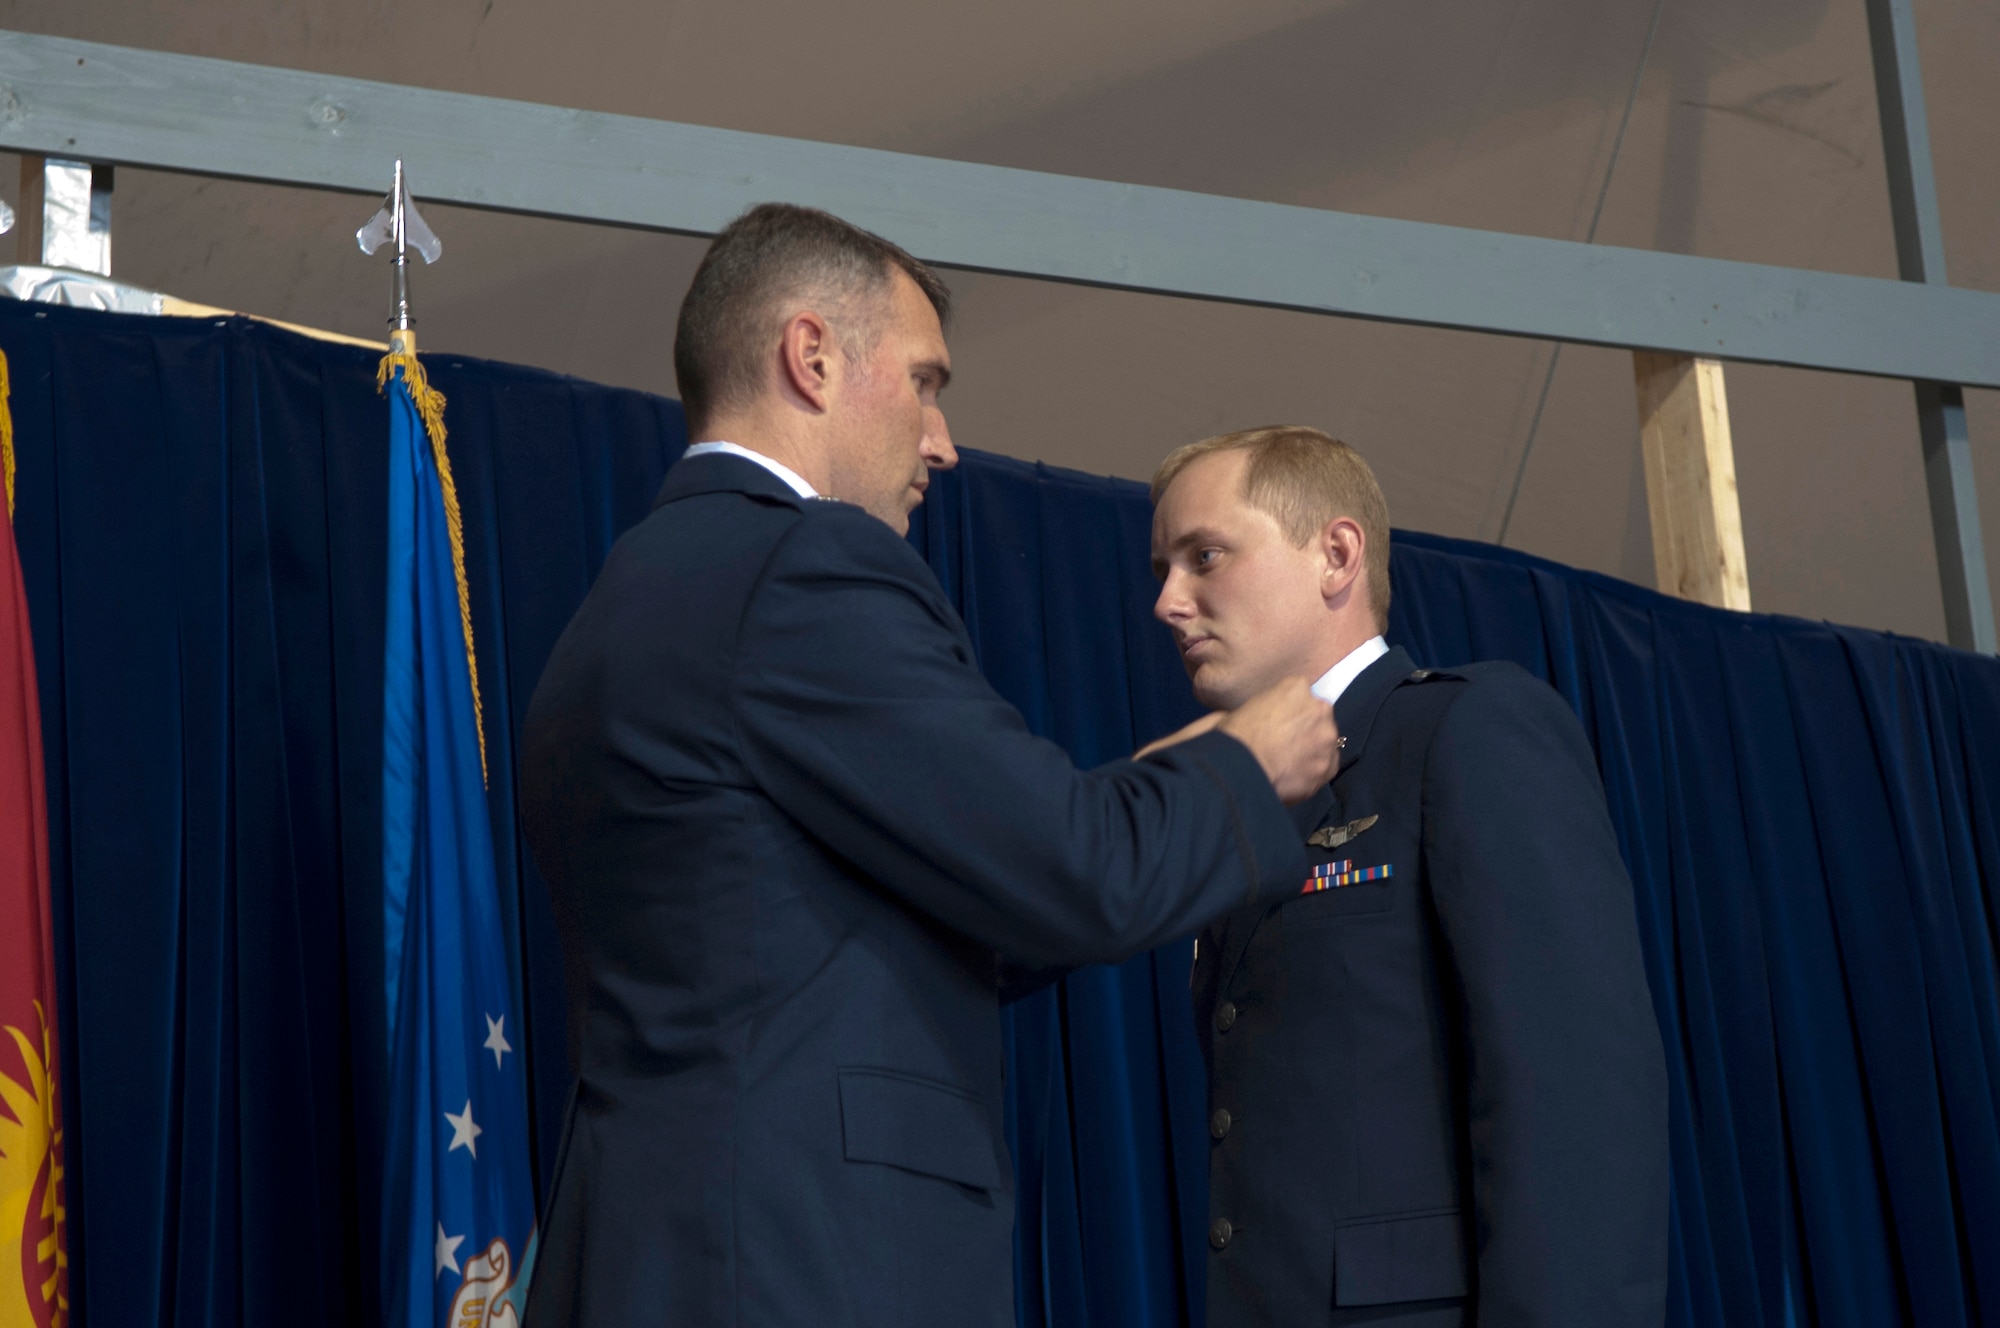 Lt.Col. James Mach, 22nd Expeditionary Air Refueling Squadron commander, pins the rank of captain onto Capt. Norman Popp, 22 EARS pilot, during a 376th Air Expeditionary Wing promotion and awards ceremony at Transit Center at Manas, Kyrgyzstan, August 31, 2013. The rank has been passed down through U.S. combat zones and conflicts since World War II. Popp is deployed out of RAF Mildenhall, England, and is a native of Jackson, Mo.(U.S. Air Force photo/Staff Sgt. Robert Barnett)